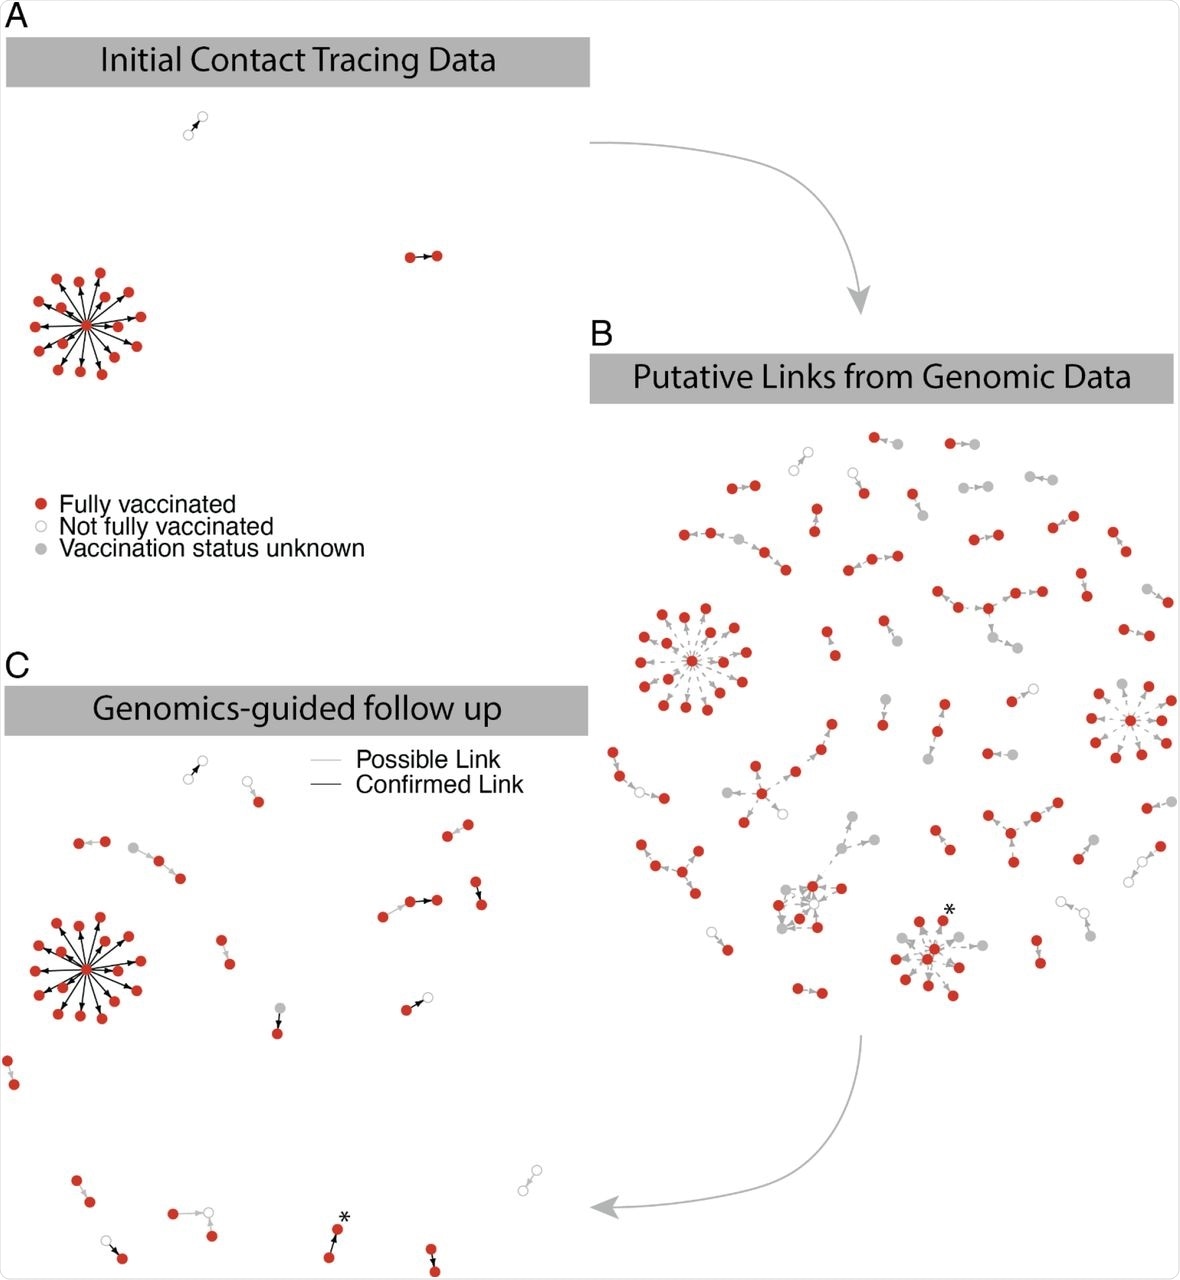 Identification of putative transmission events from vaccinated individuals. A. High-confidence transmission links from contact tracing investigation. B. Predicted transmission links based on genomic sequence, intrahost variants, and symptom onset date. C. Genomics-predicted transmission links corroborated by further epidemiological follow-up. Putative contacts are grouped into possible links (grey lines) and known links (black lines) to denote plausible vs. confirmed contacts between transmission pairs. A confirmed transmission pair that is part of a larger cluster of putative links, described in the text, is marked with an asterisk.